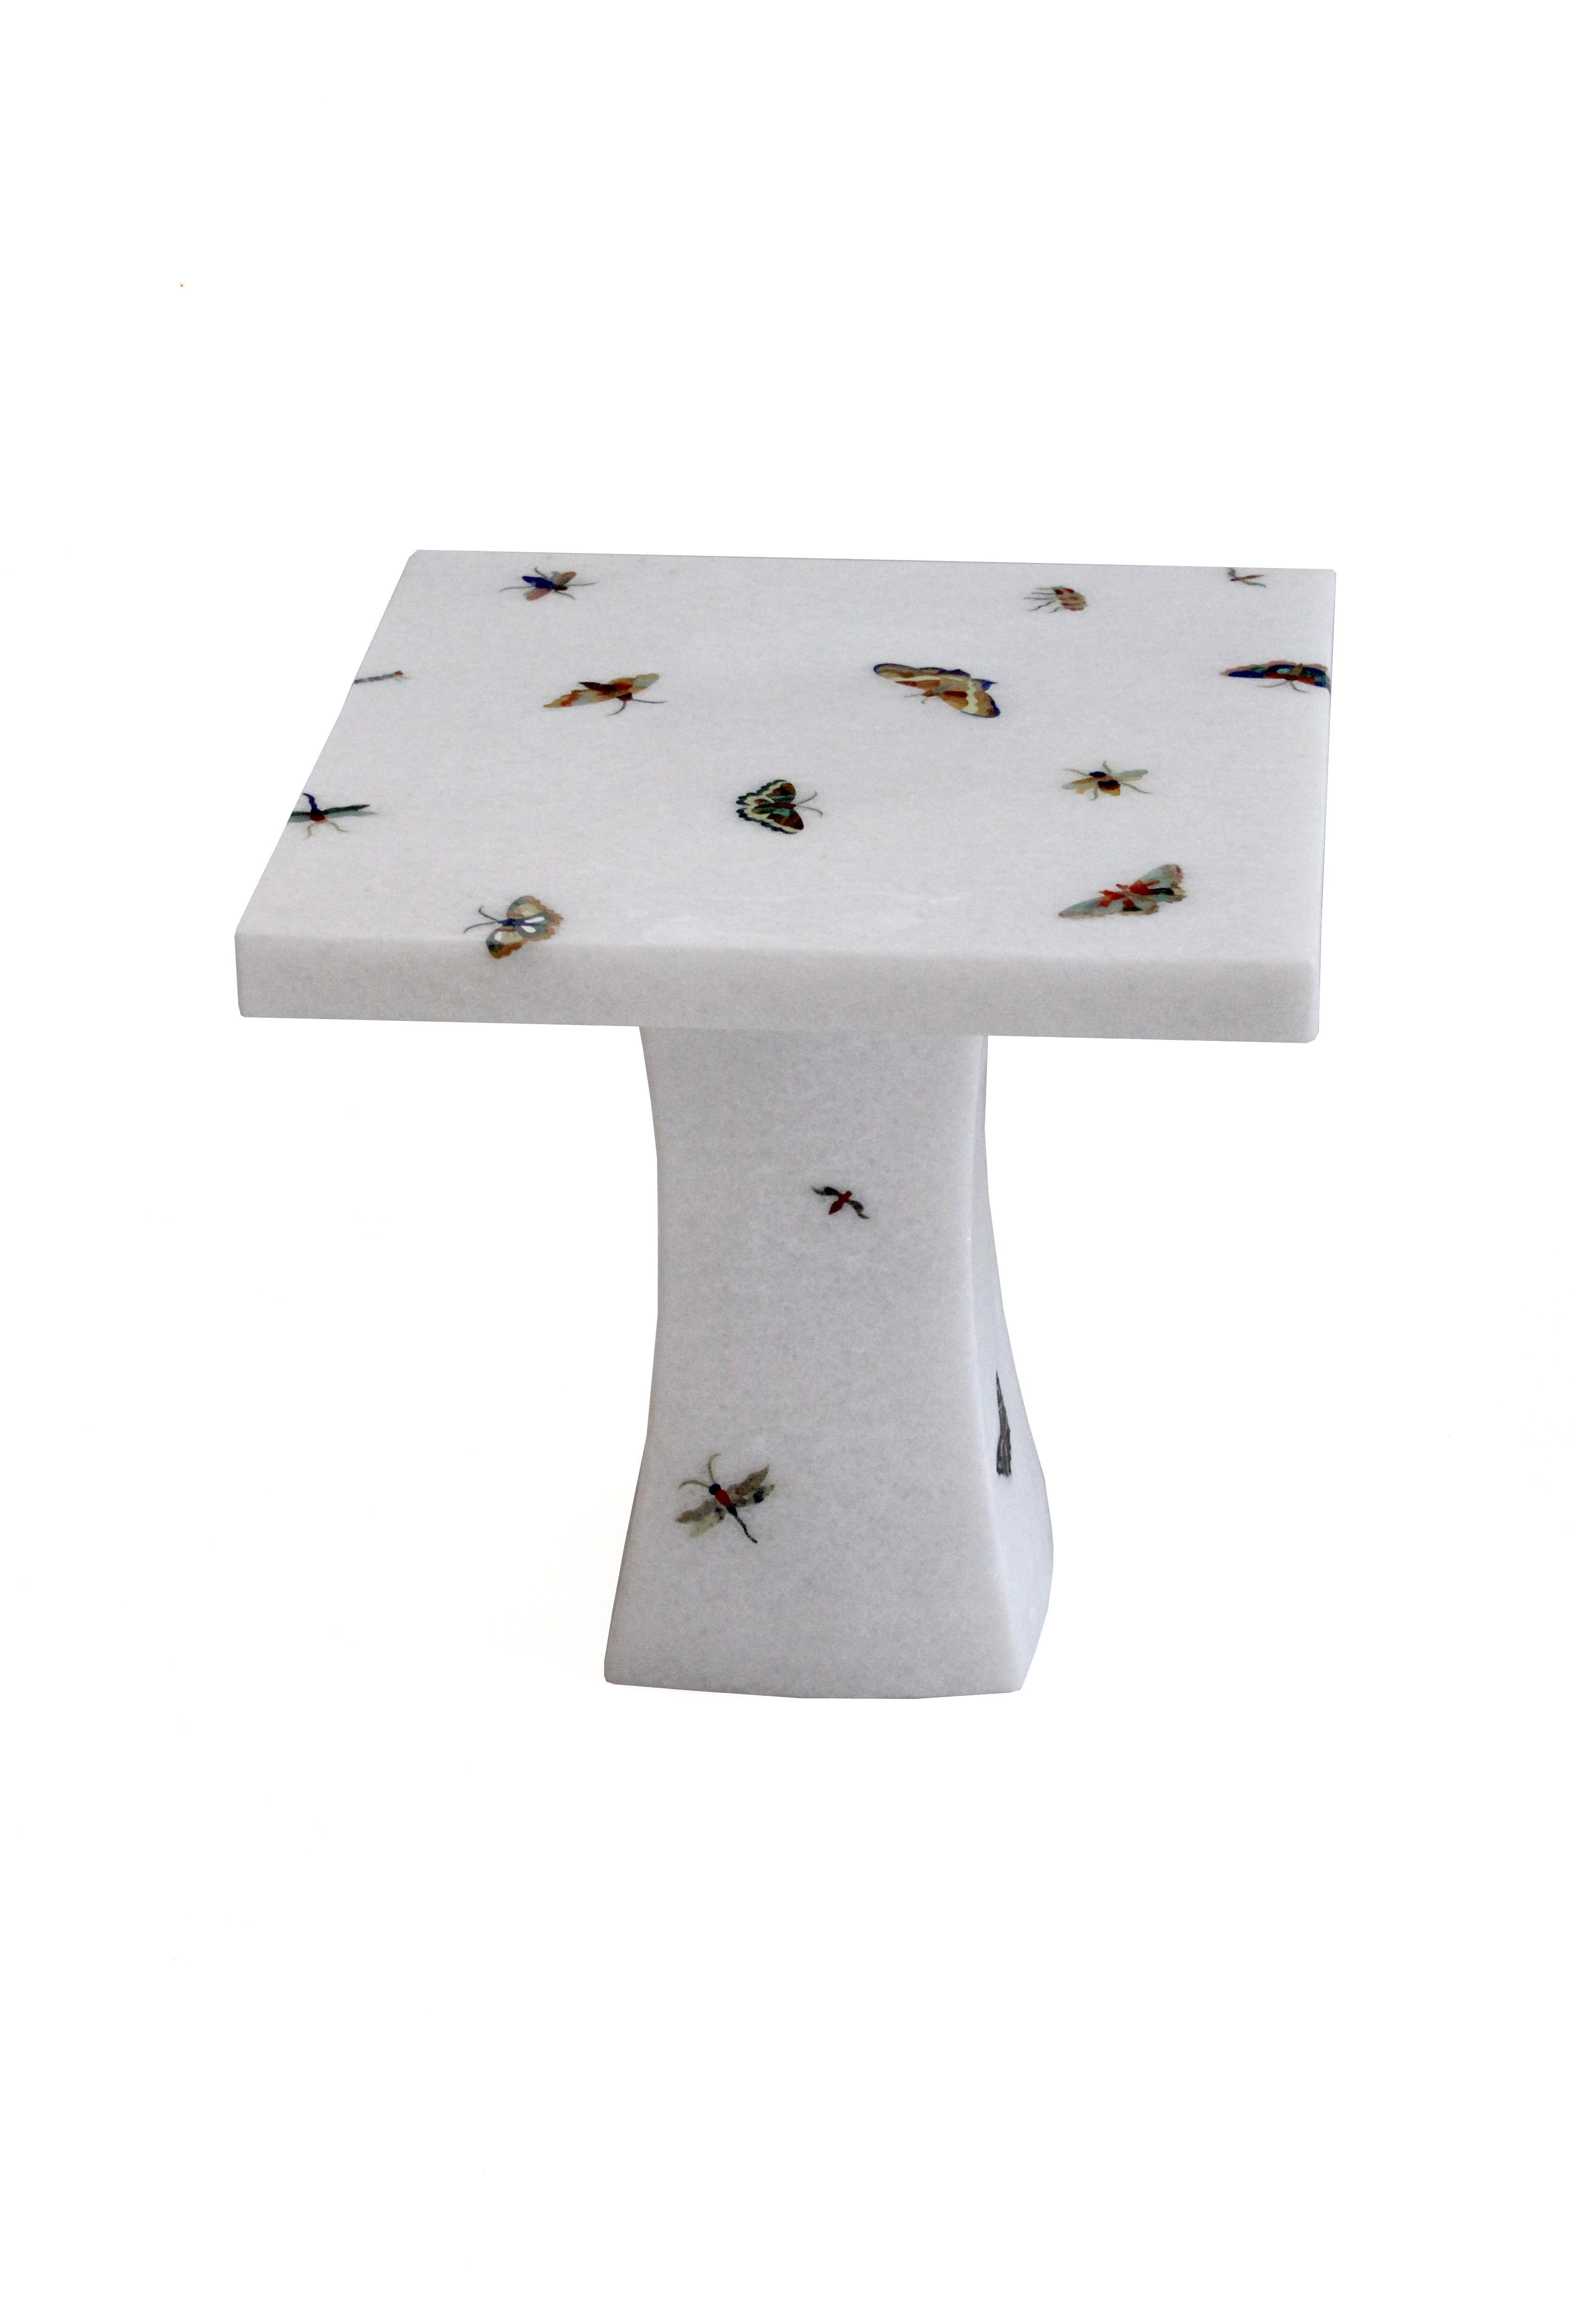 Other Butterfly Inlay Table In White Marble Handcrafted in India By Stephanie Odegard For Sale